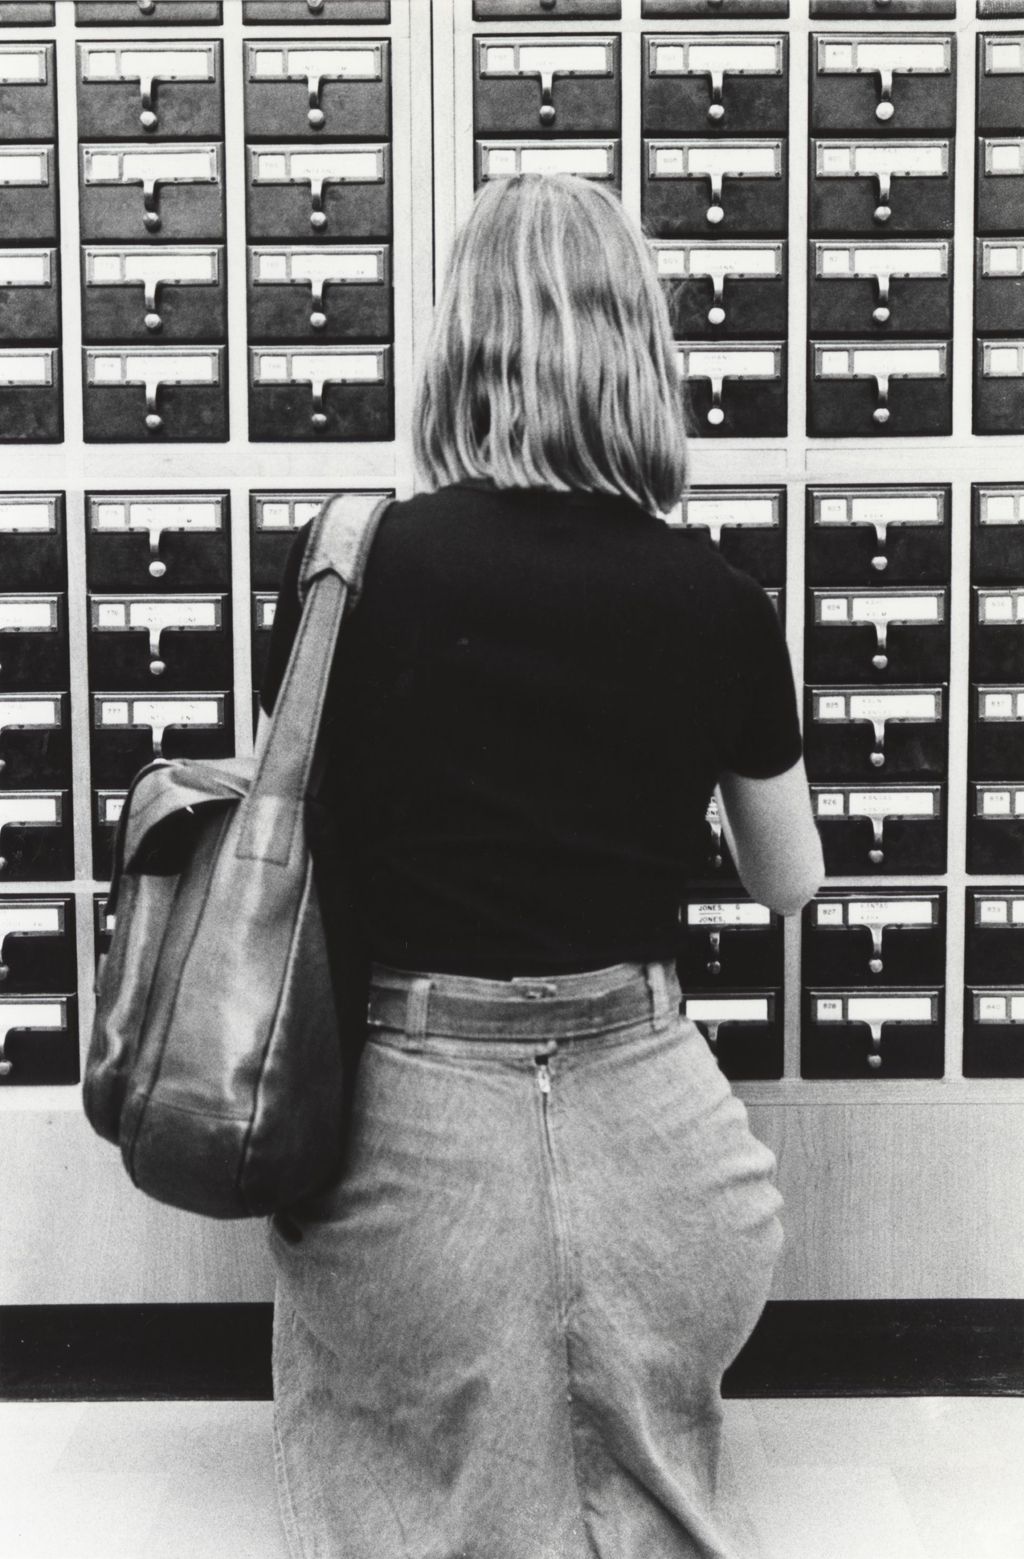 Miniature of Student using a card catalog at the Richard J. Daley Library